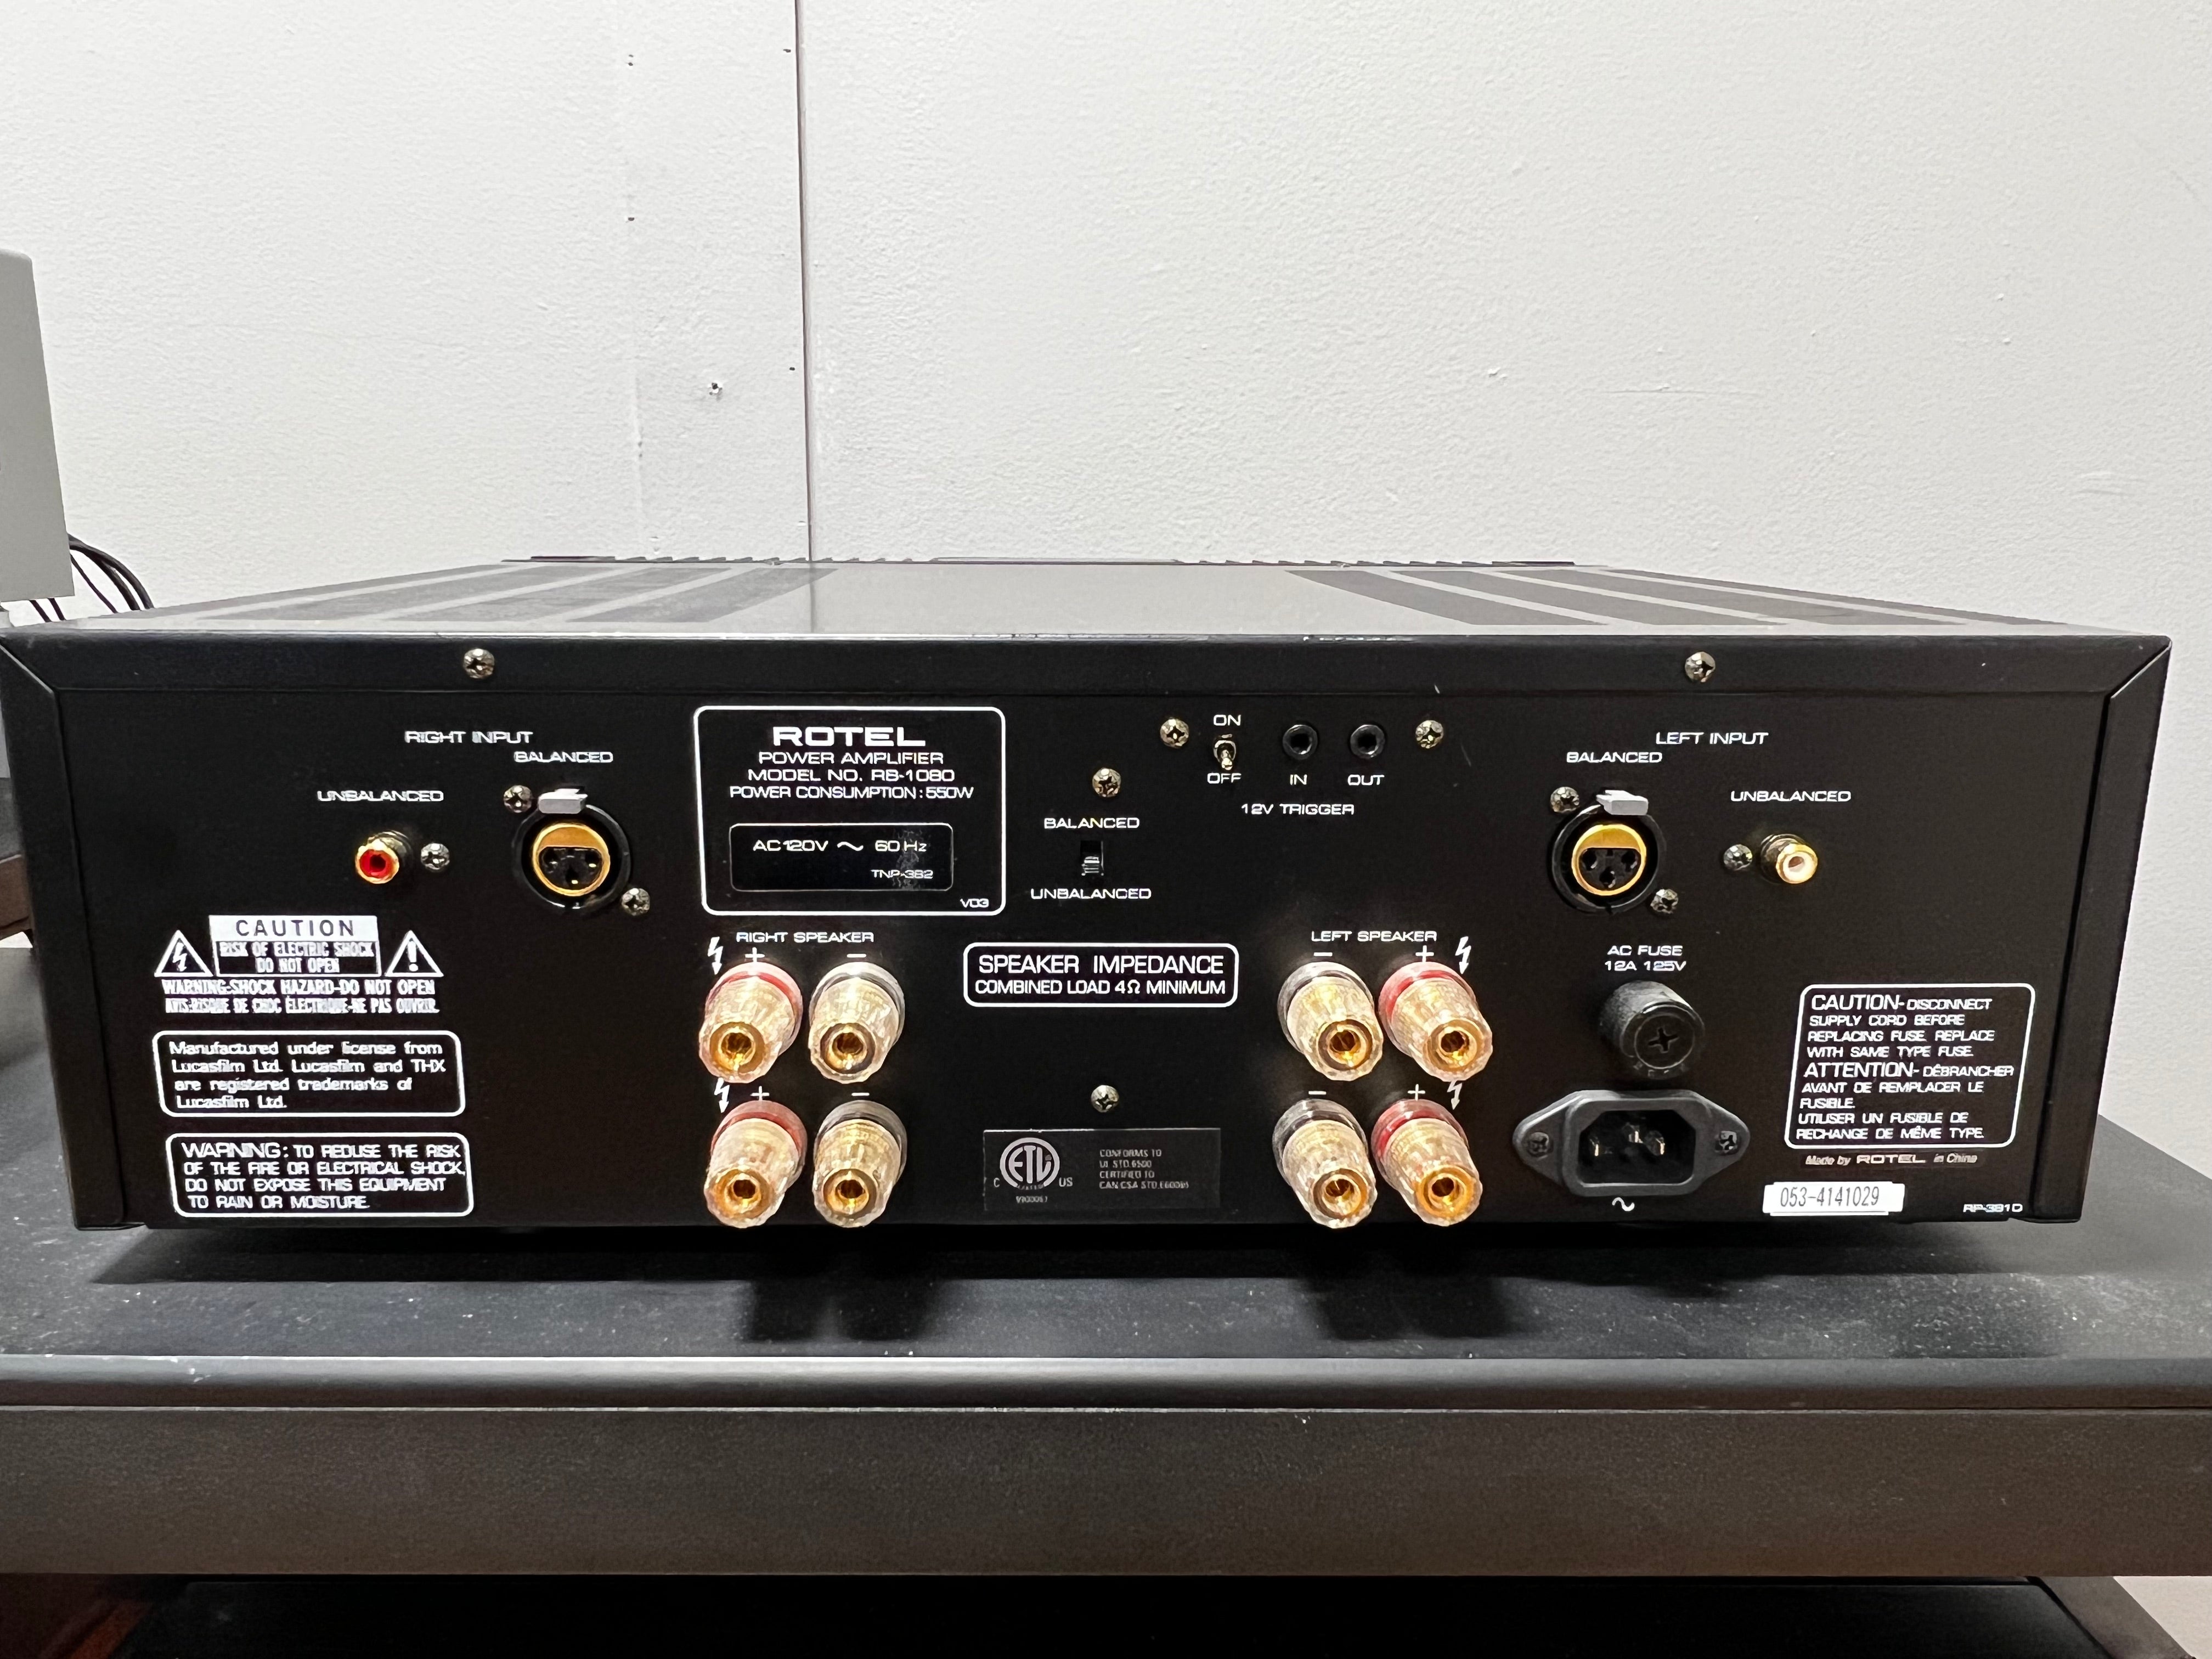 Rotel RB-1080 Power Amp, Power from the Rising Sun